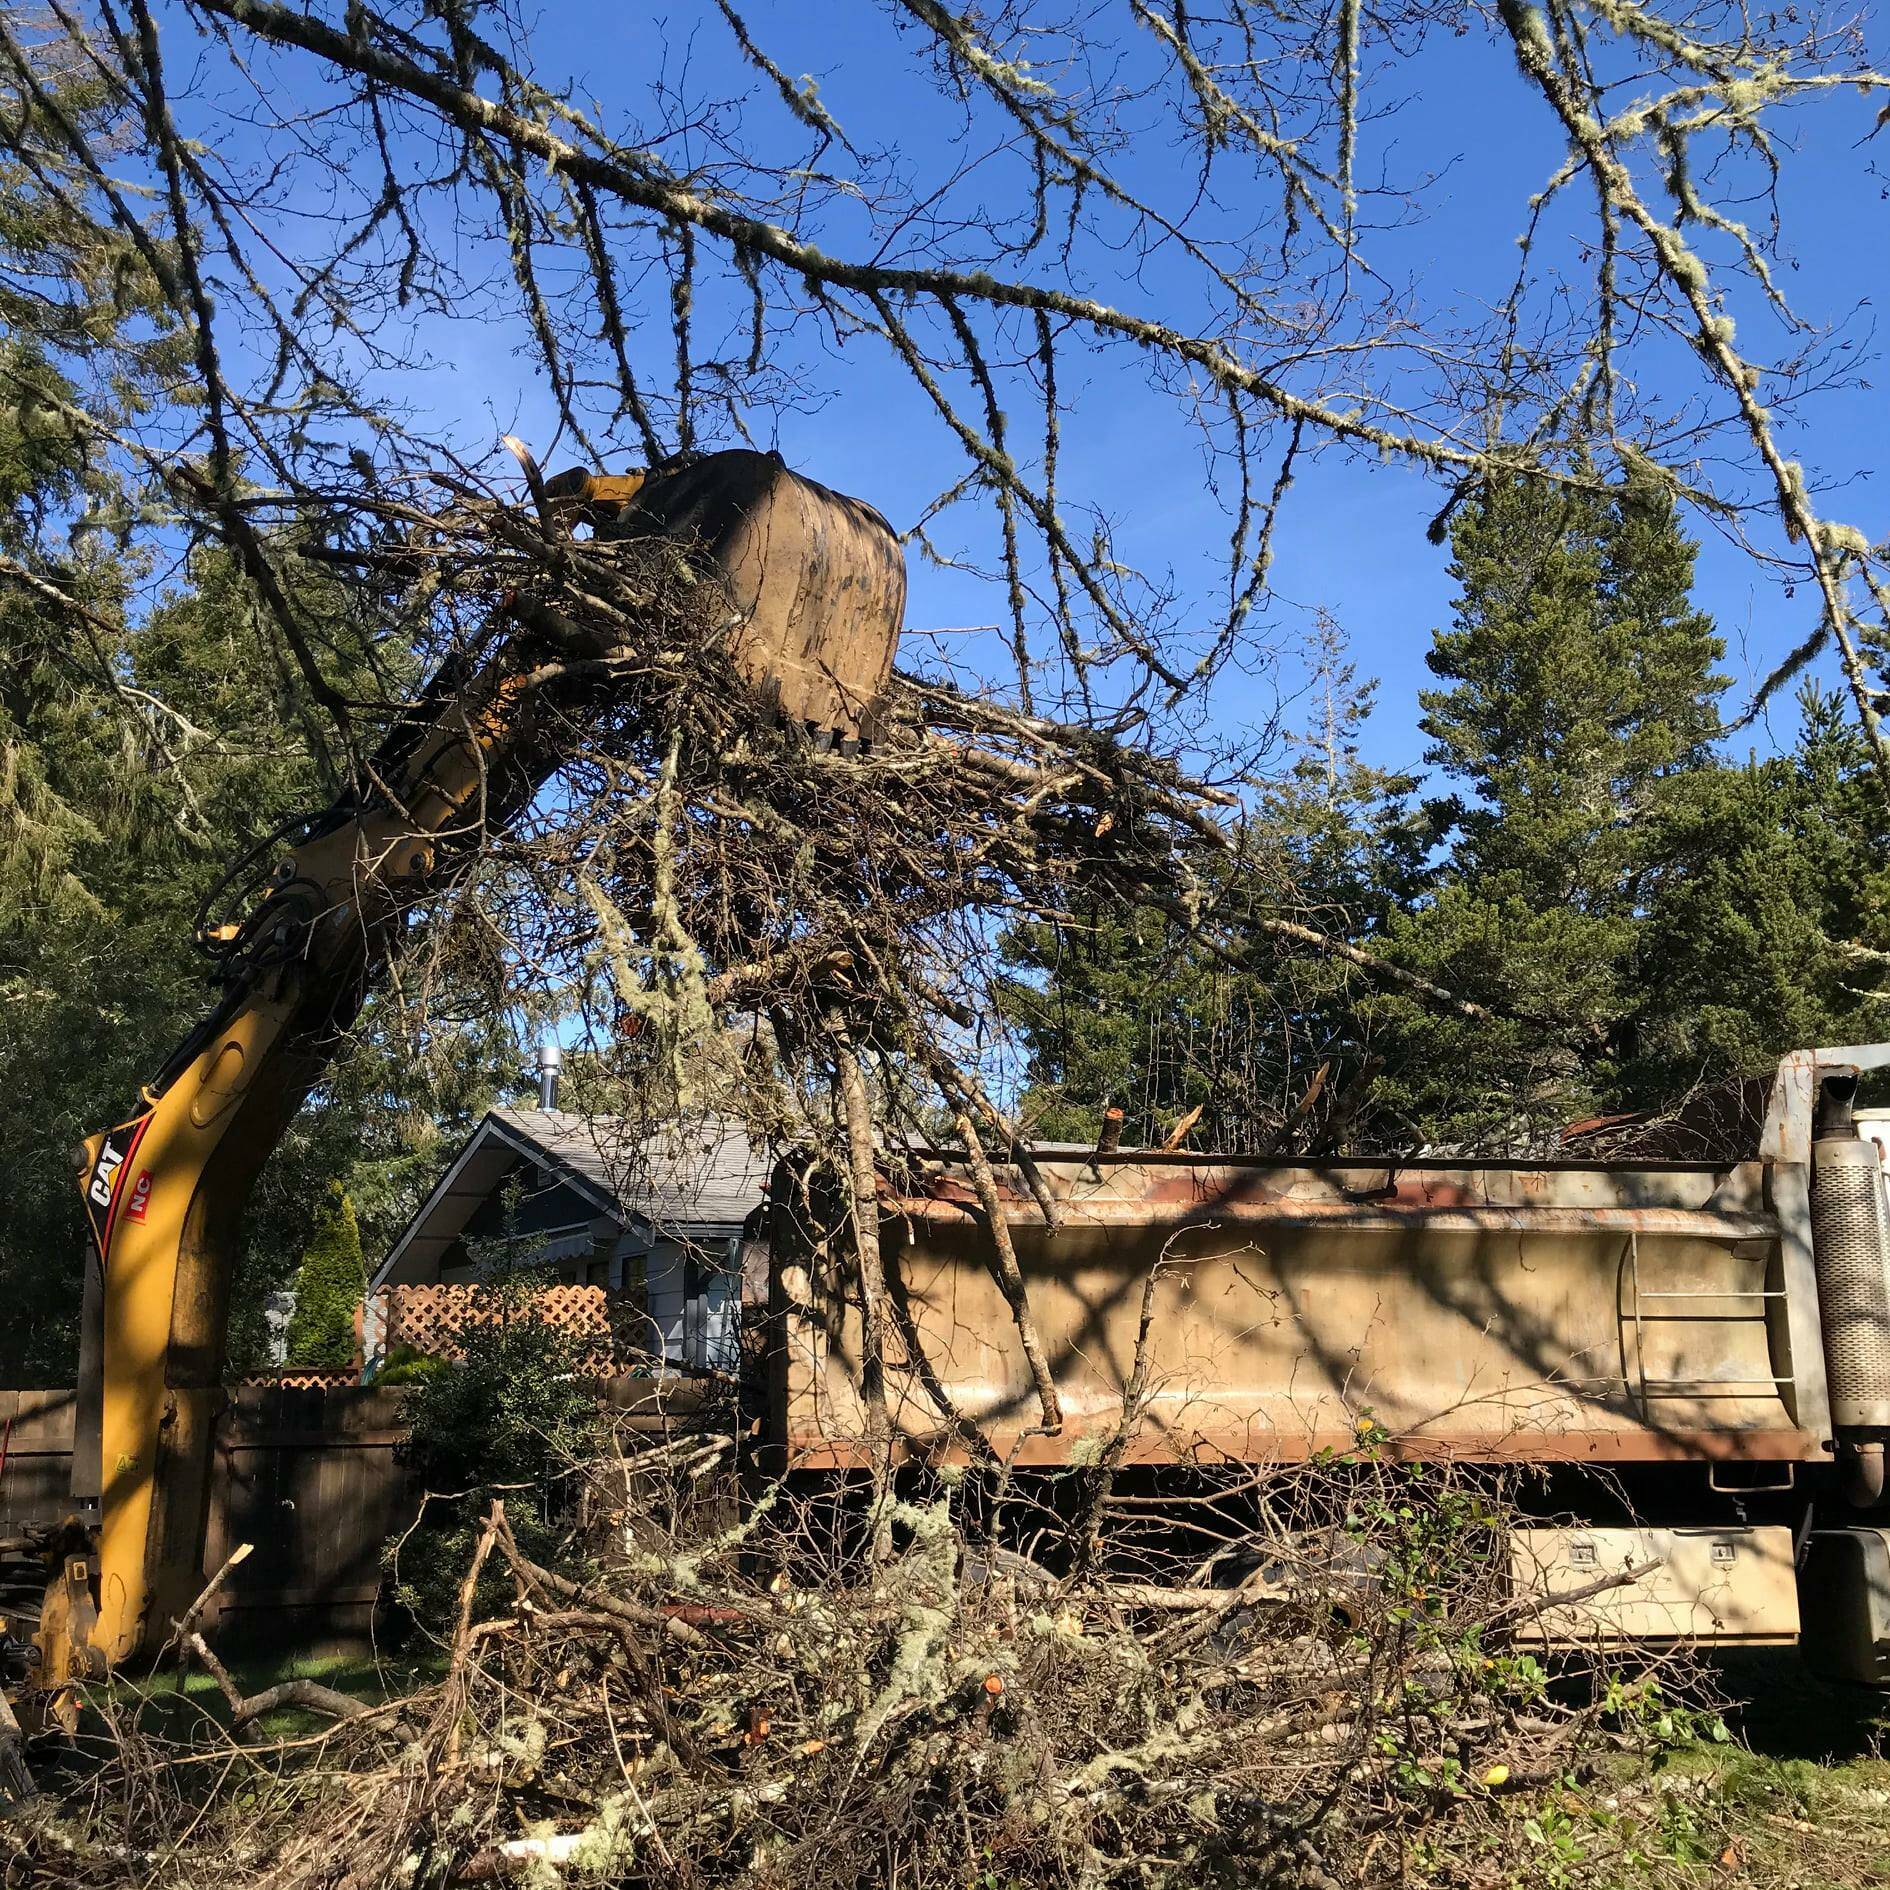 The Ocean Shores Fresh Waterways Corporation, which is comprised of volunteers, cleared debris several miles south of the Oyehut Ditch following a freeze storm in Feb. 2021. Photo courtesy of Steve Borba